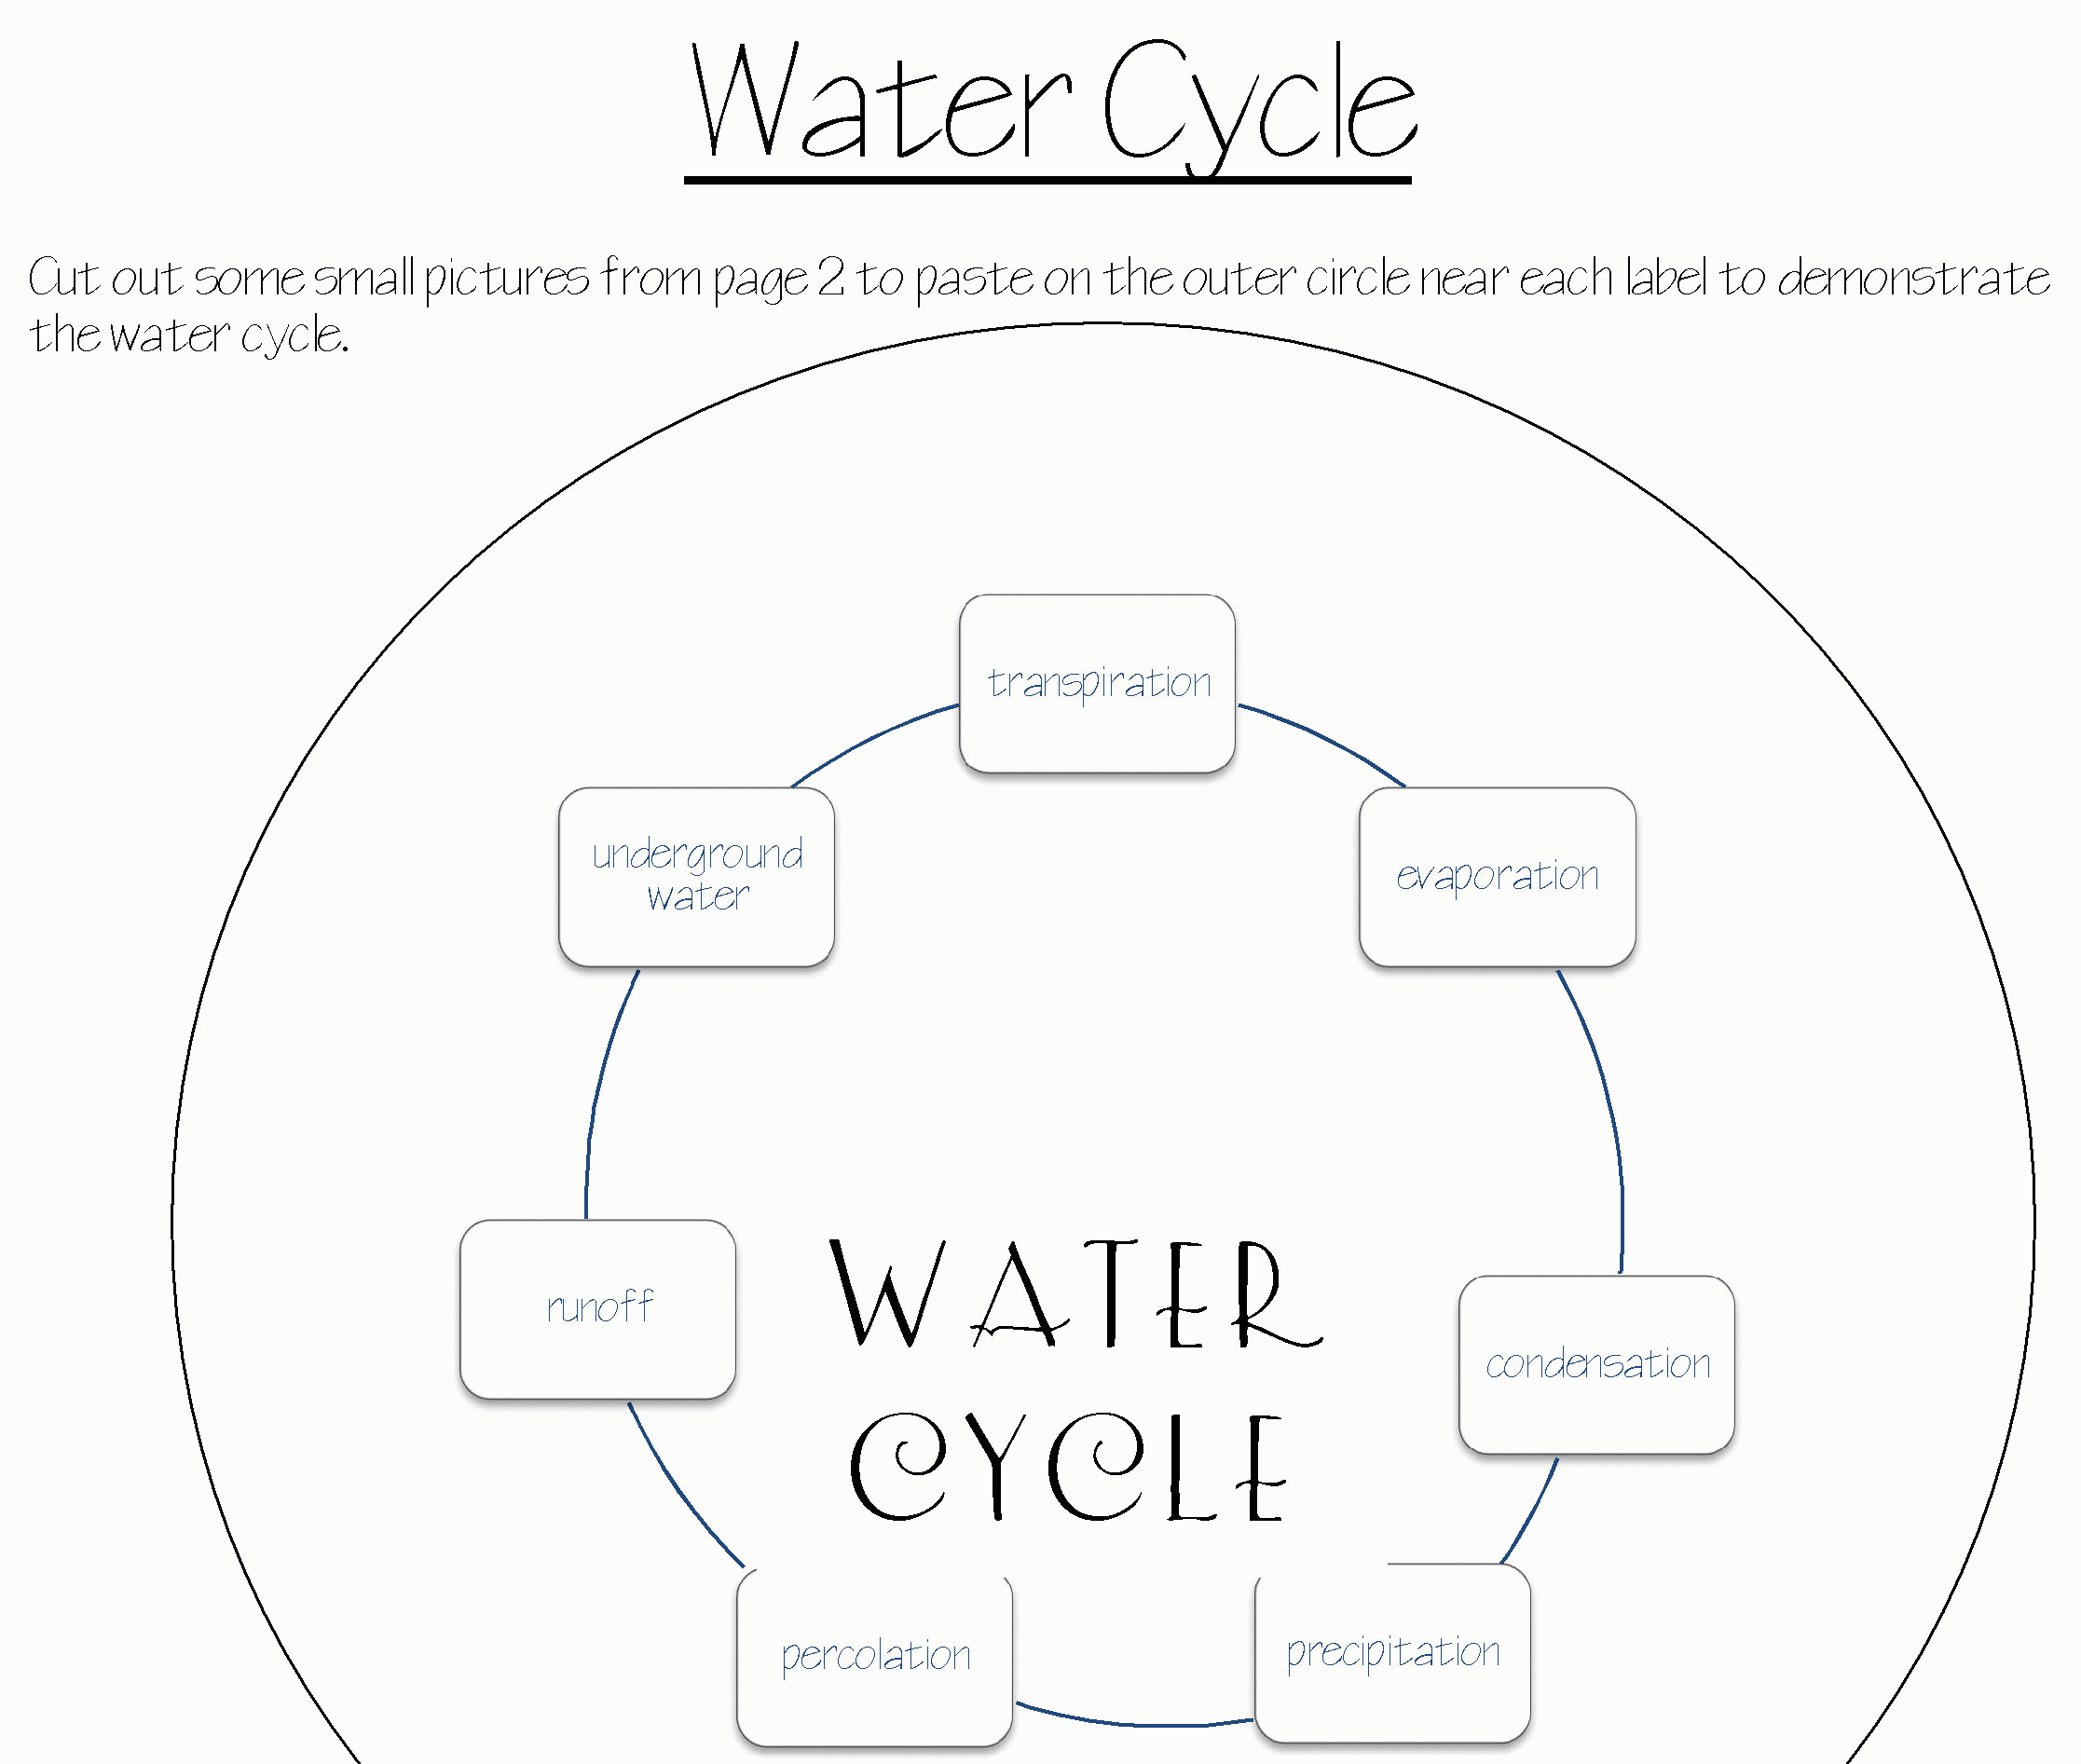 Water Cycle Diagram Worksheet Printable - The Largest and Most ...